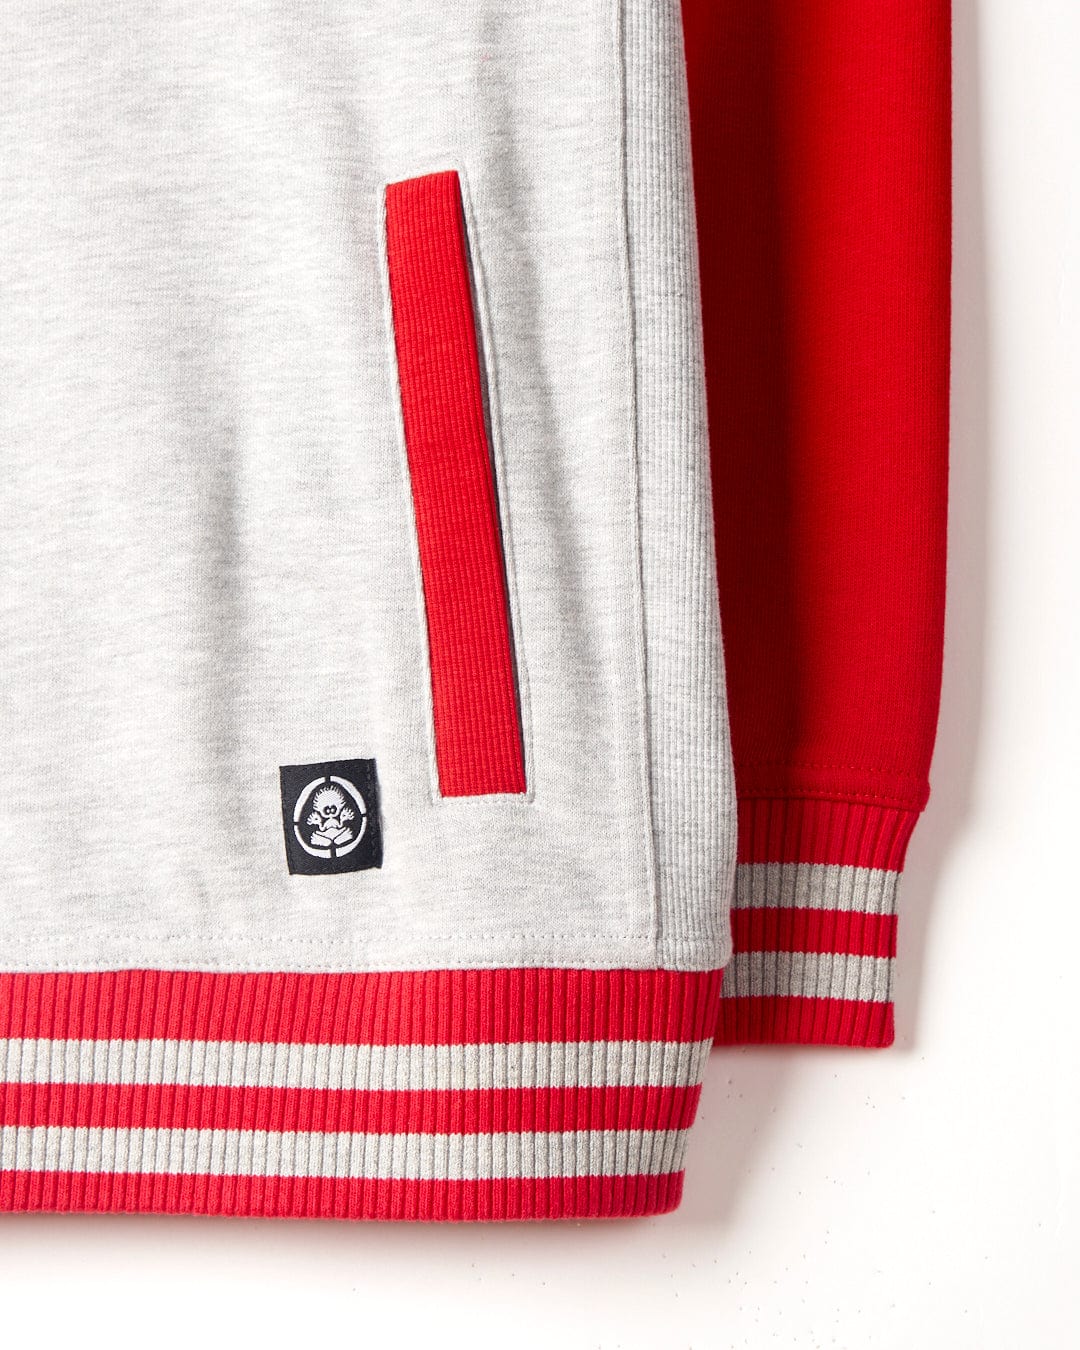 Close-up view of a grey sweatshirt with red raglan sleeves, ribbed red cuffs and waistband featuring white stripes, and a small Saltrock branding patch near the pocket. This is the Saltrock Drop Out - Kids Sweat Shirt - Grey/Red.